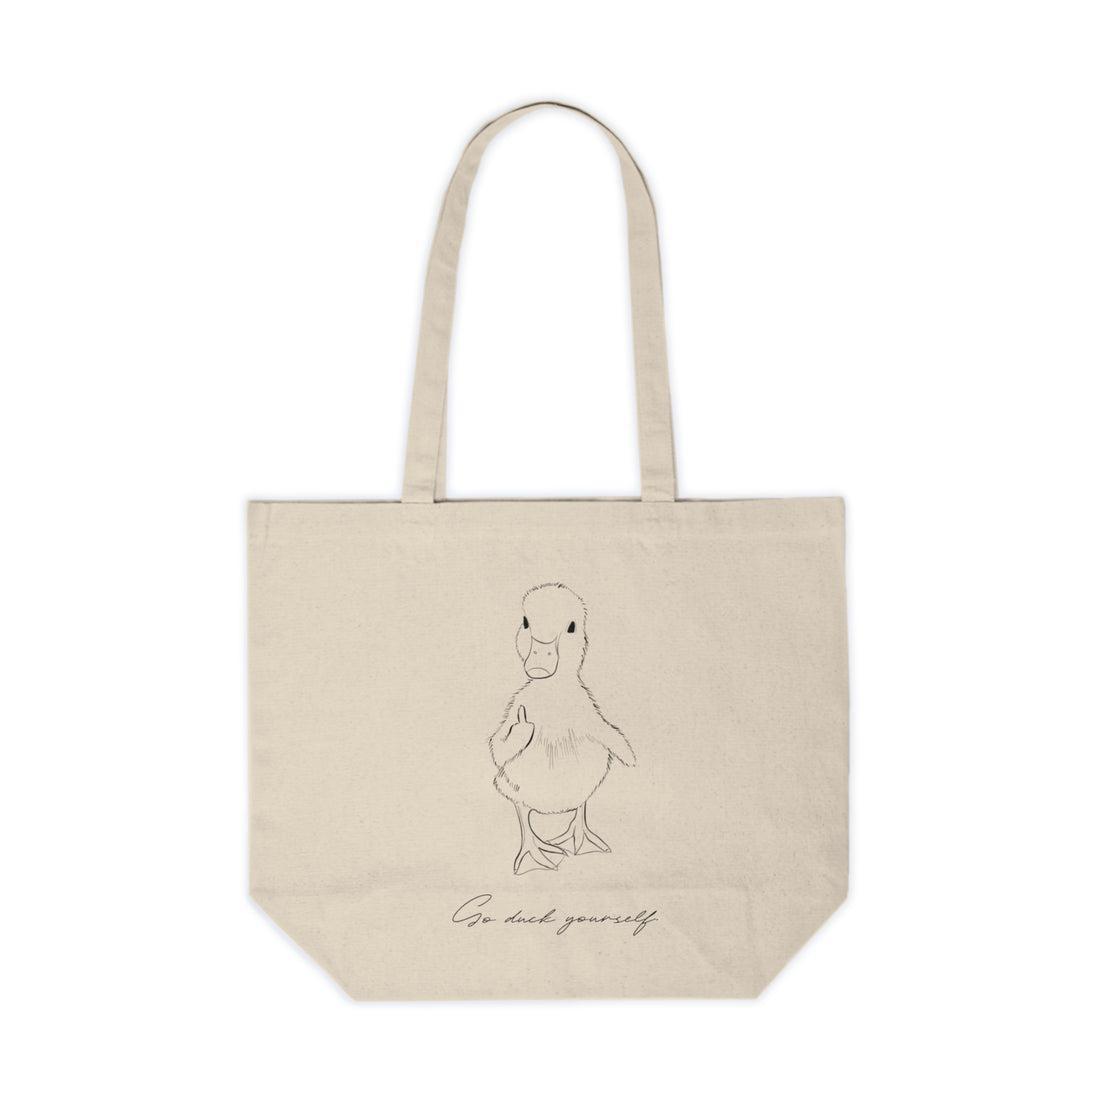 Go Duck Yourself / Totebag